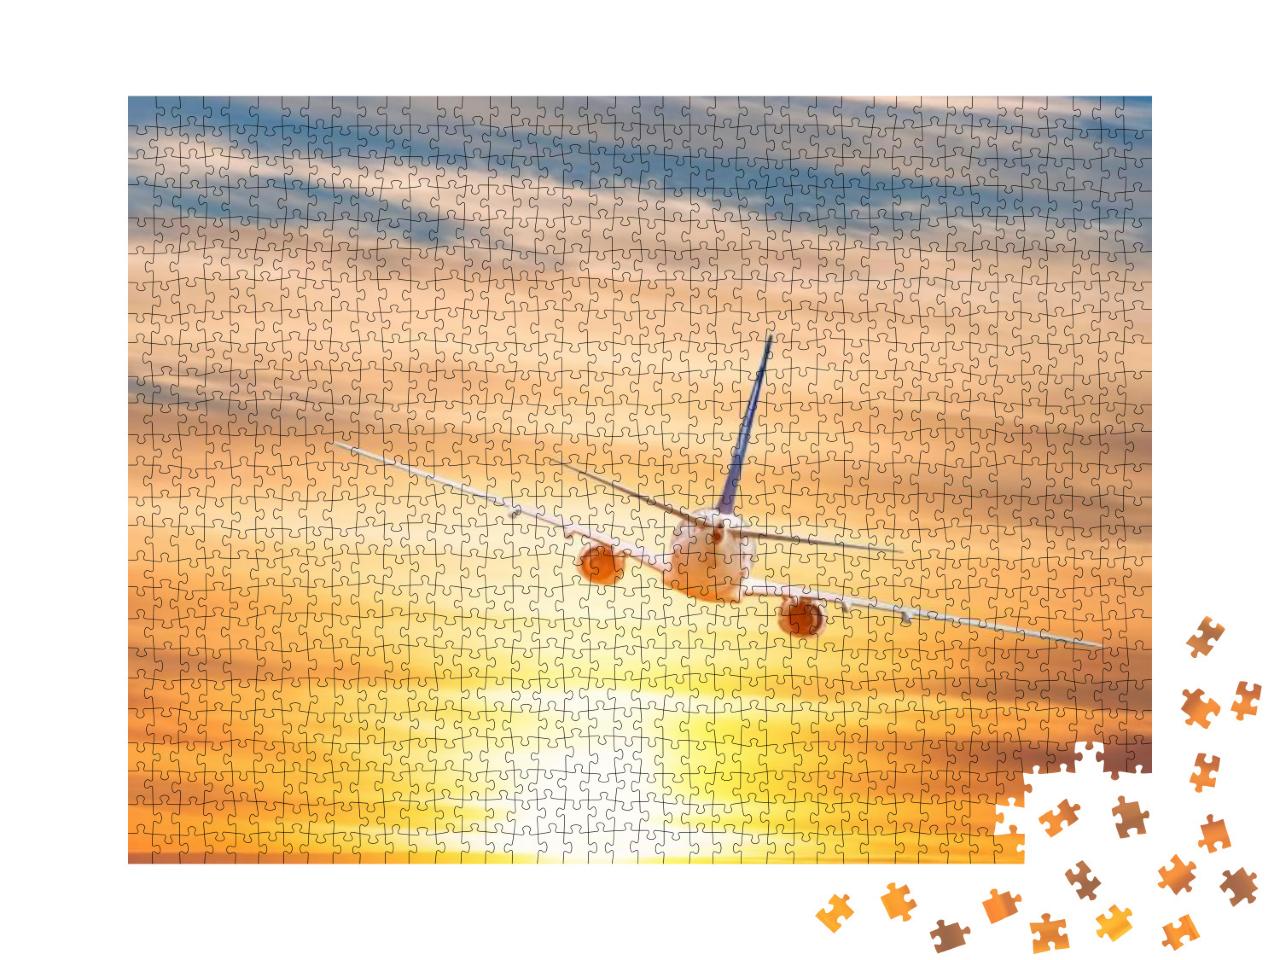 Airplane Flies Into the Sunset & Evening Clouds... Jigsaw Puzzle with 1000 pieces